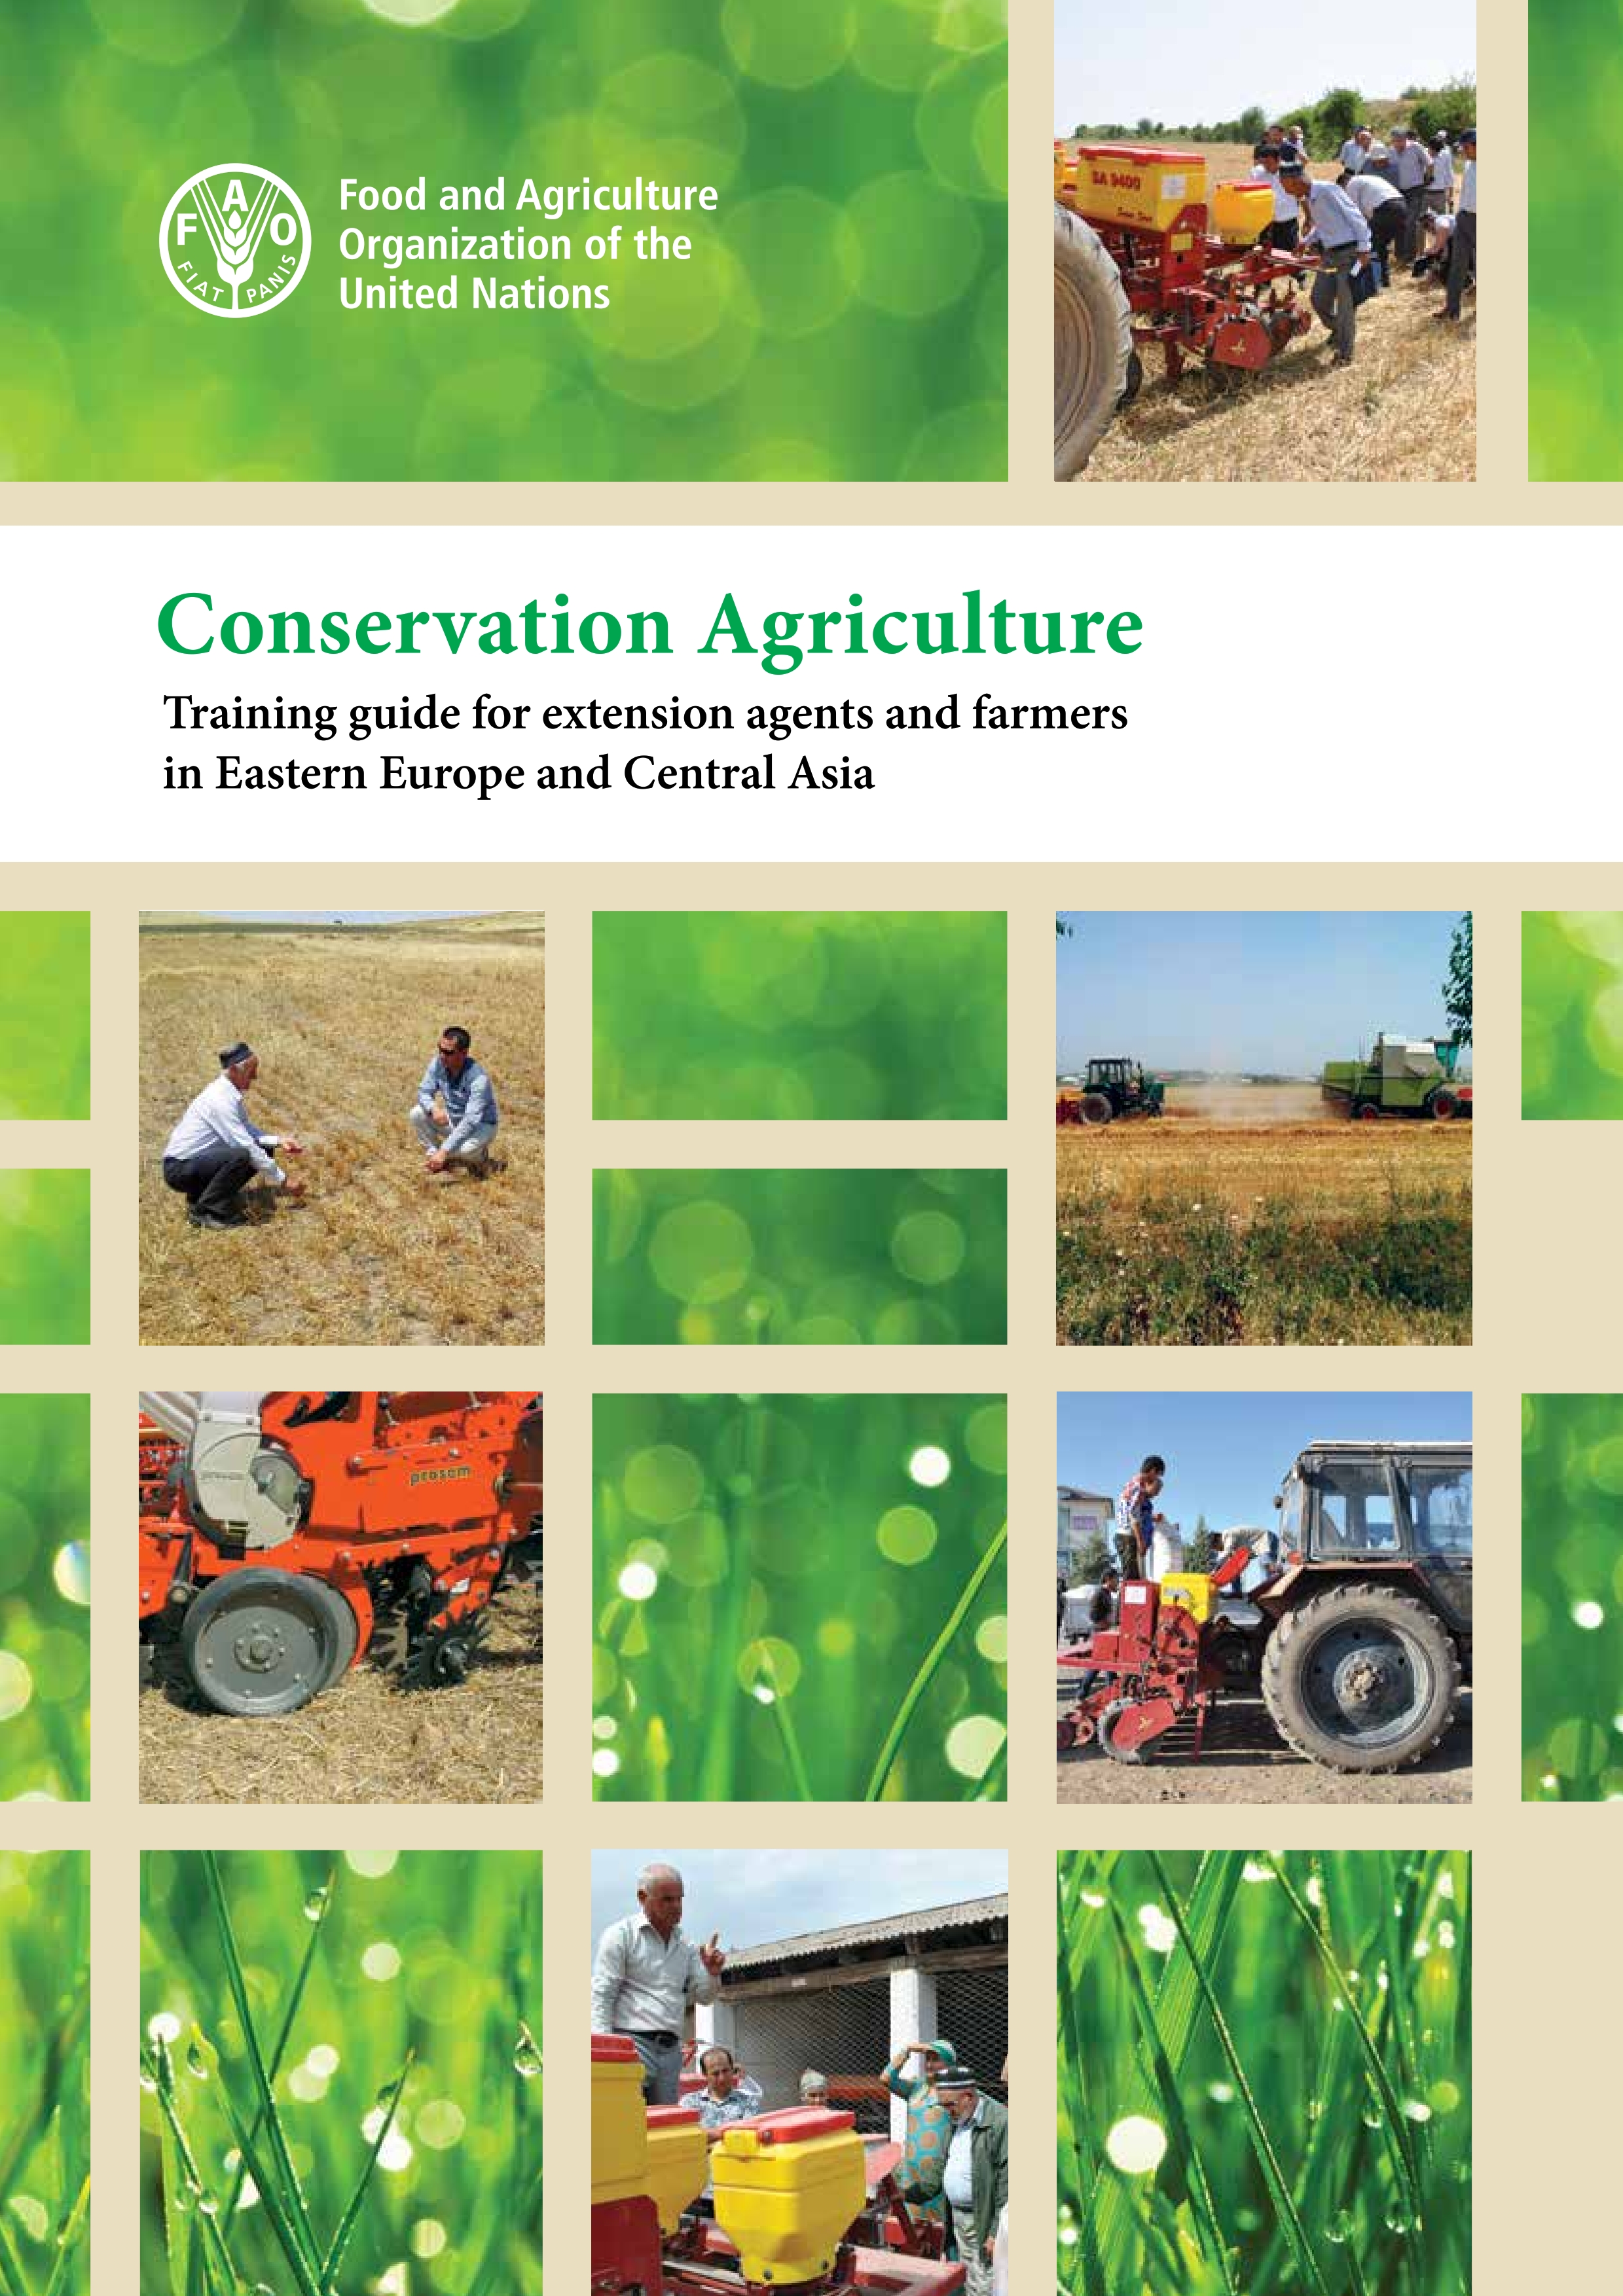 Conservation Agriculture Training guide for extension agents and farmers in Eastern Europe and Central Asia